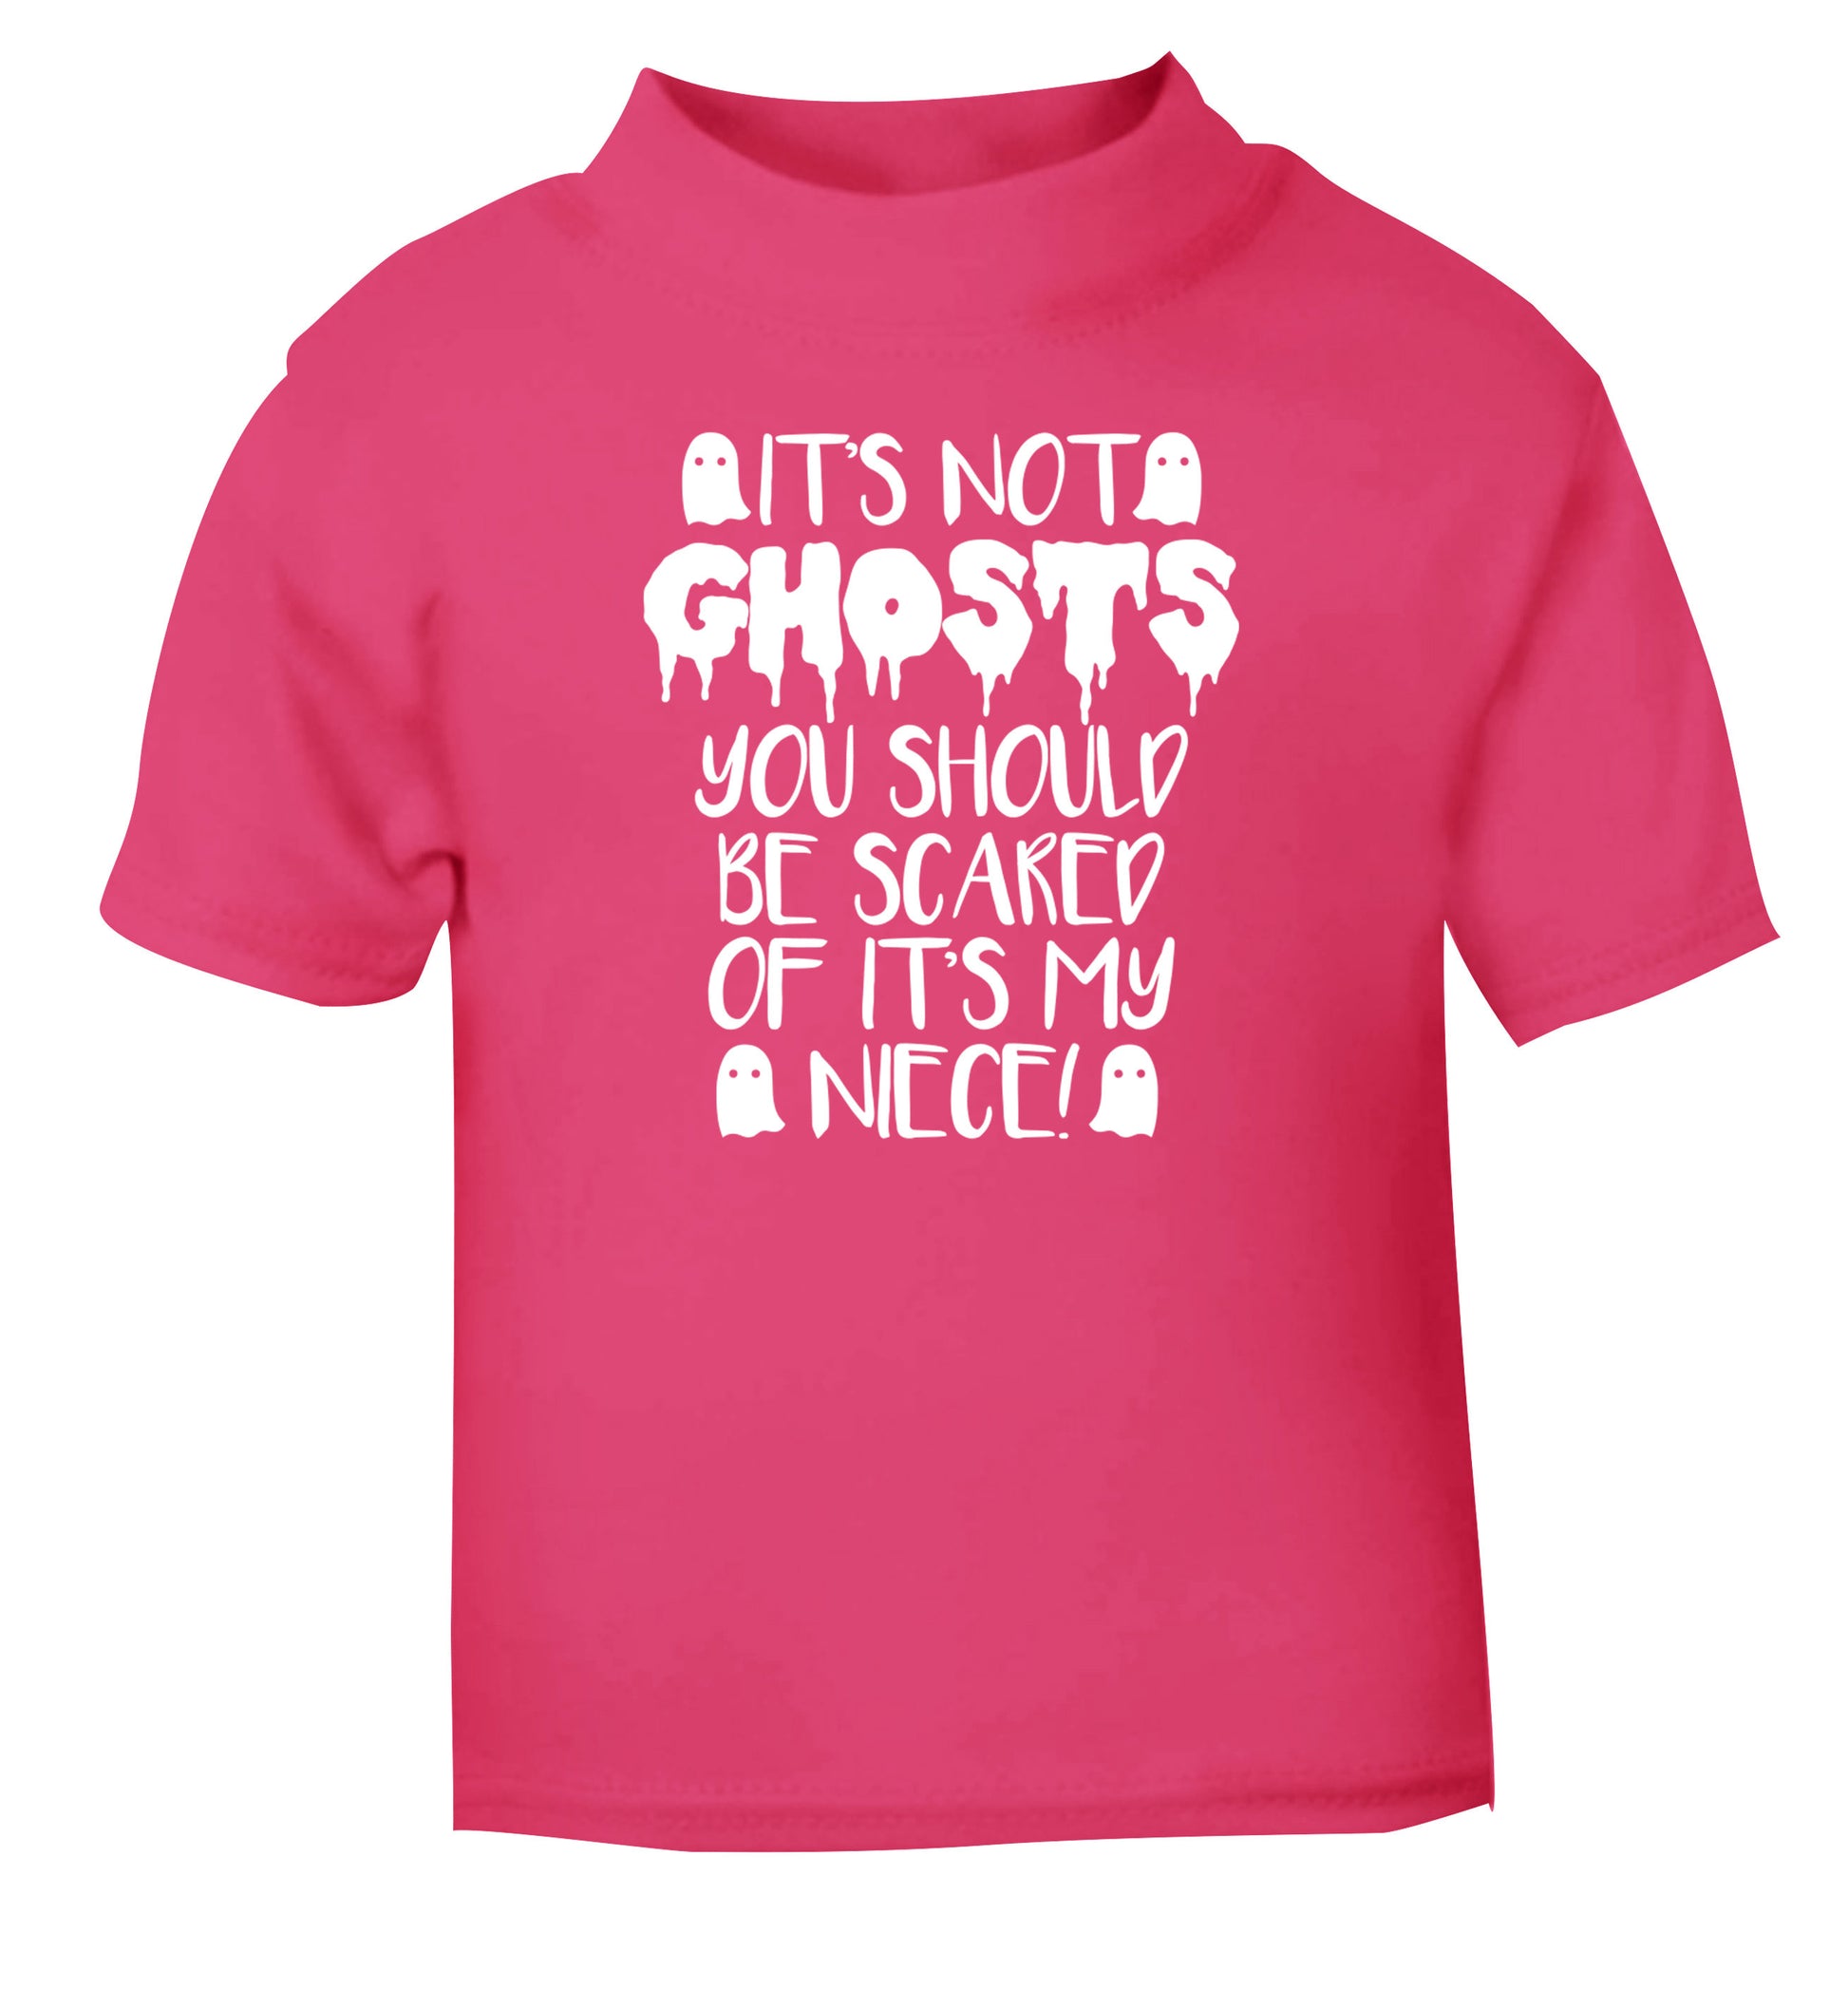 It's not ghosts you should be scared of it's my niece! pink Baby Toddler Tshirt 2 Years